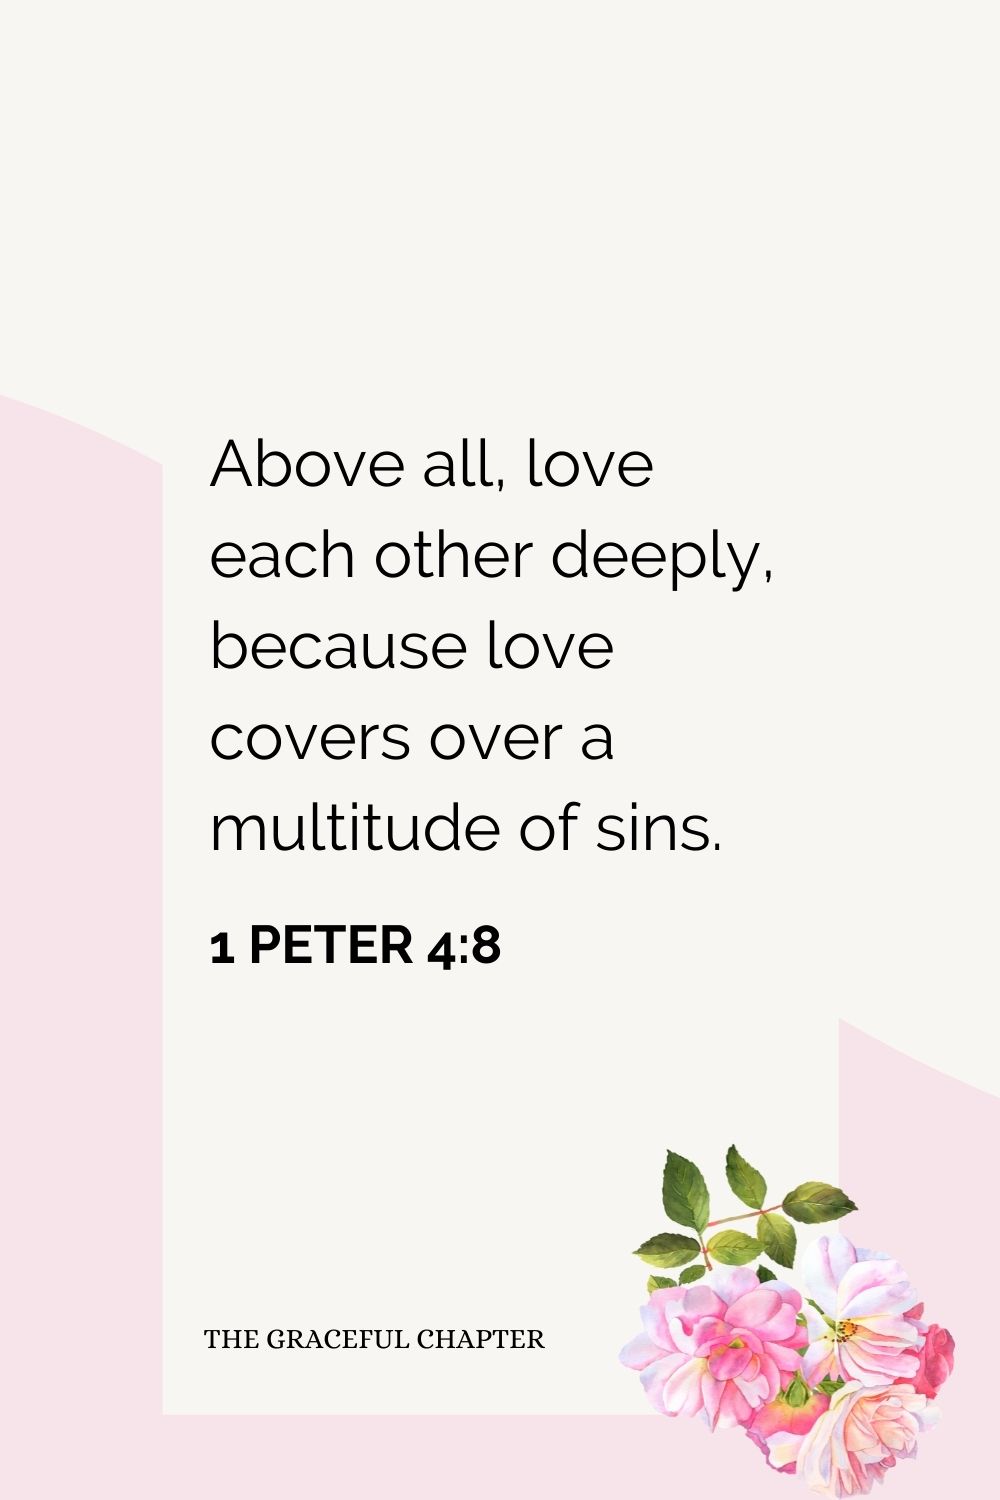 Above all, love each other deeply, because love covers over a multitude of sins. 1 Peter 4:8